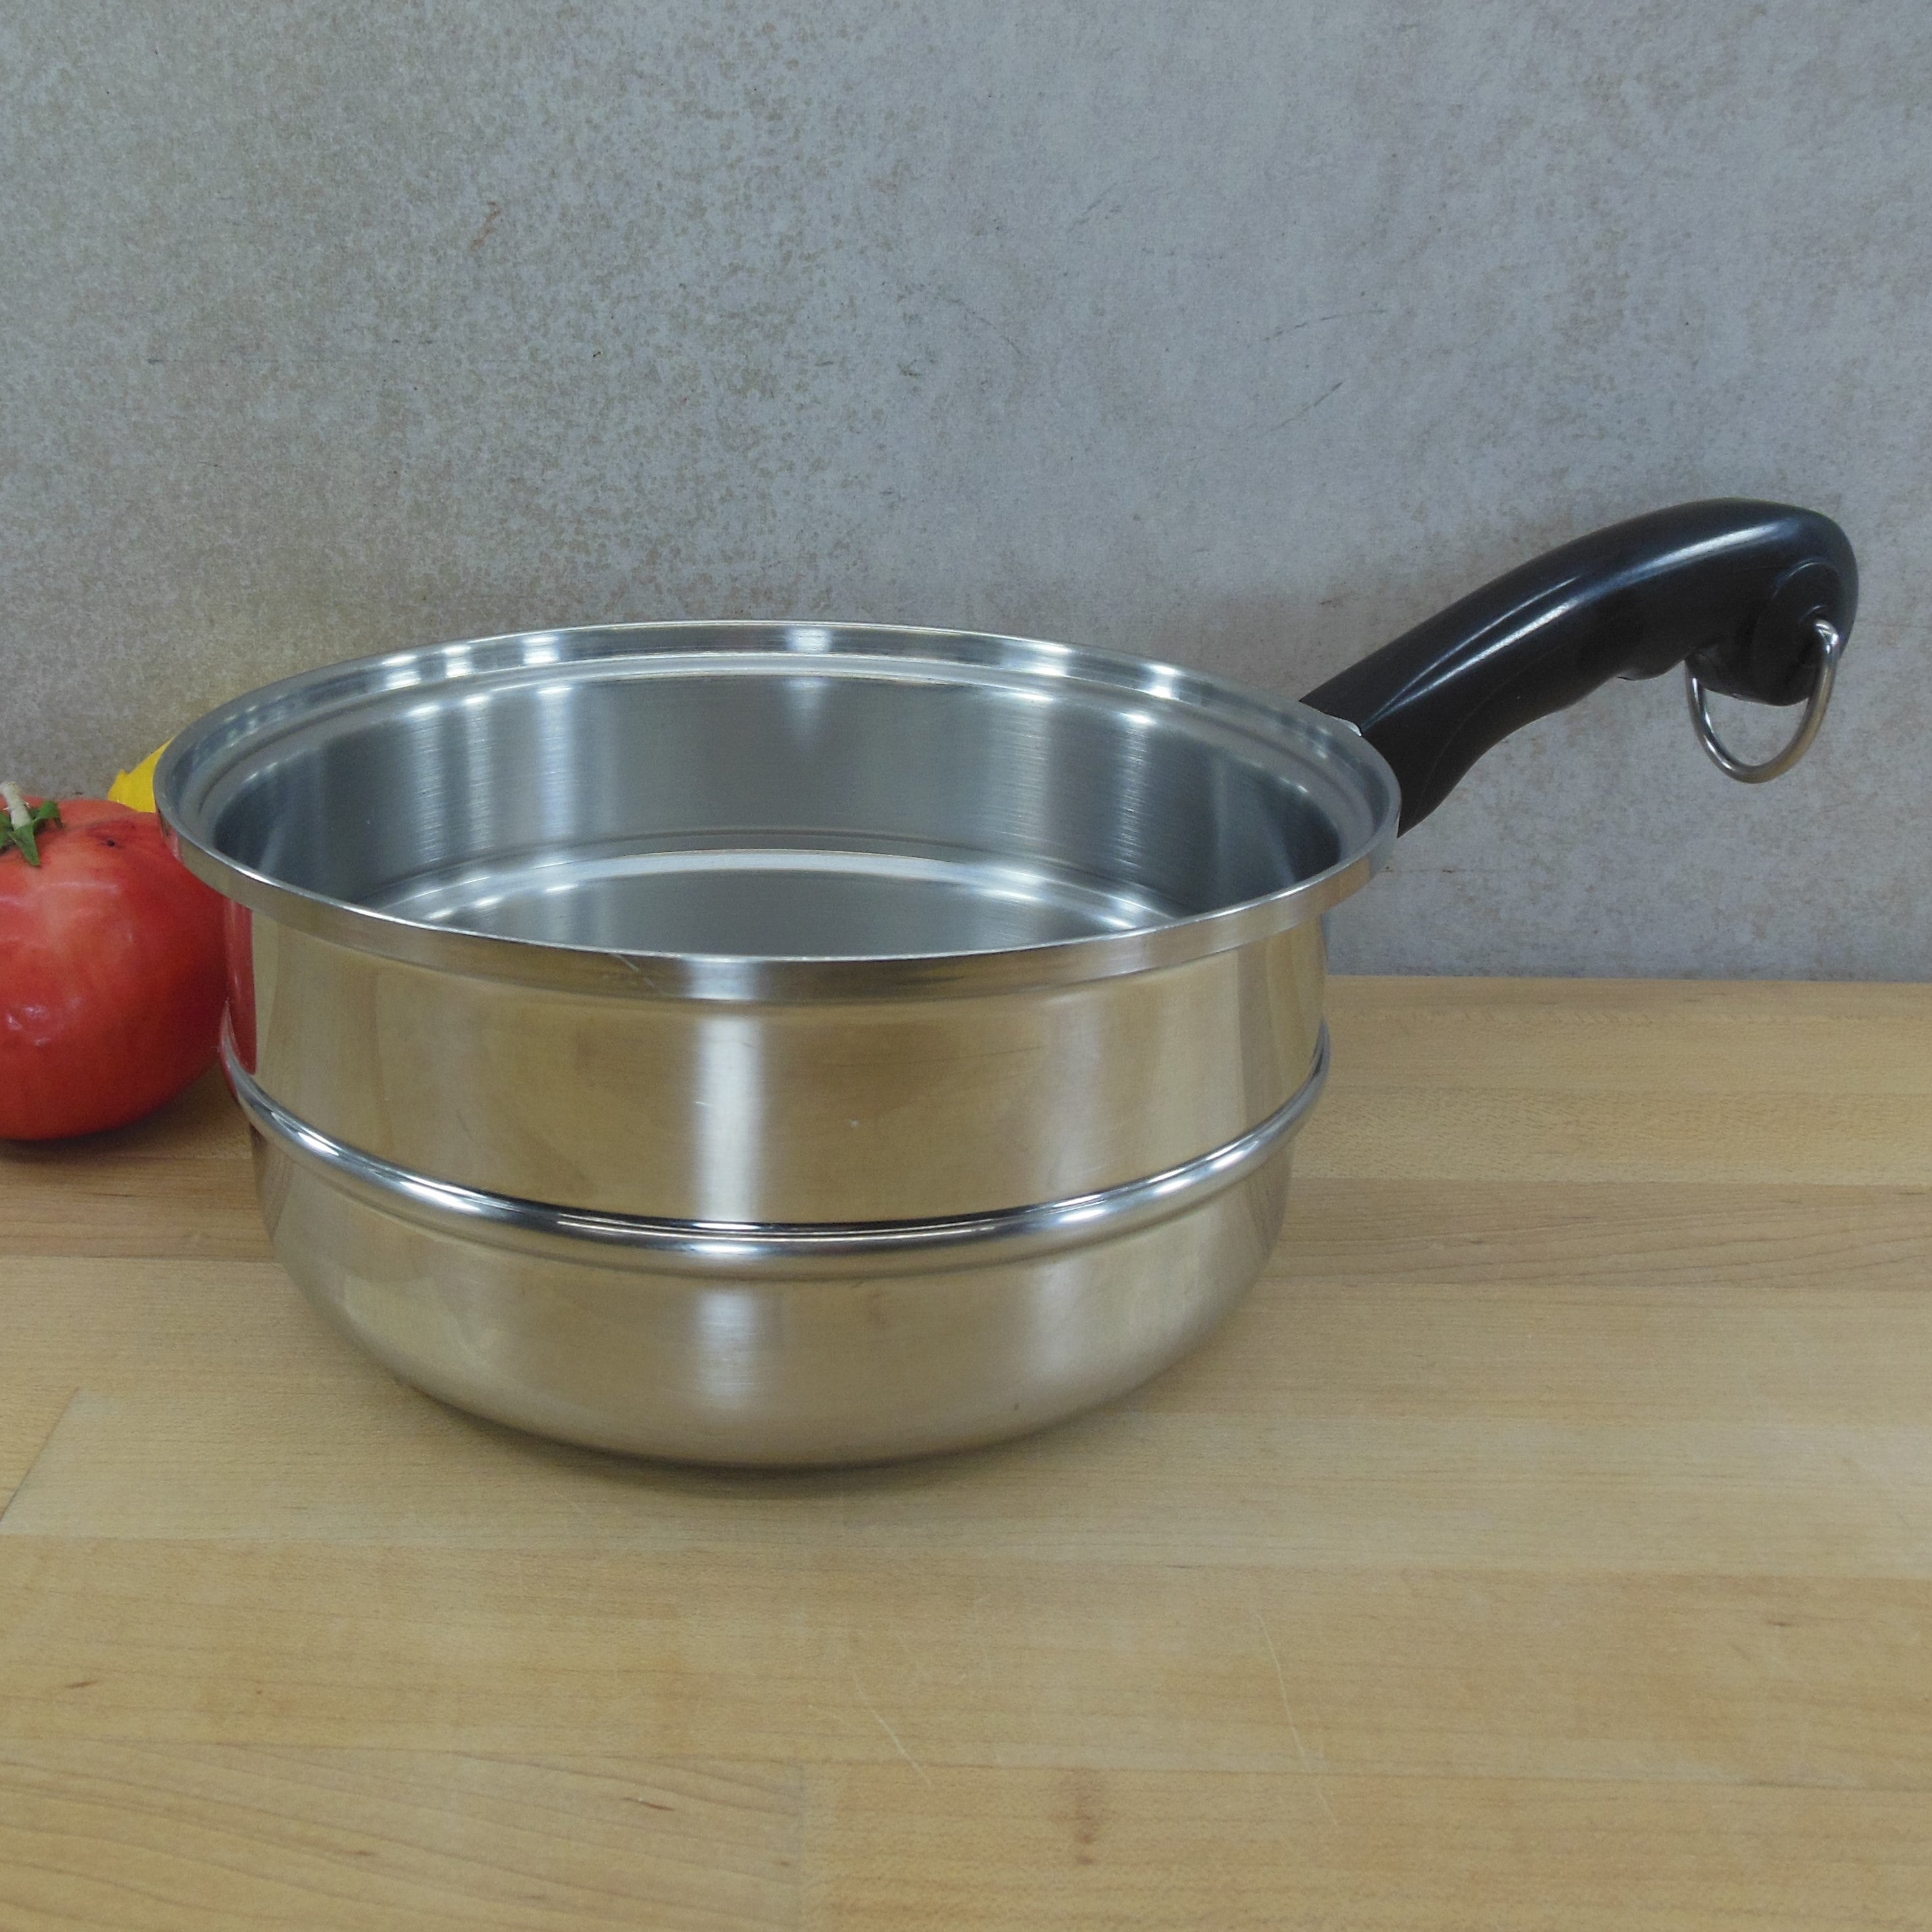 Saladmaster > Our Products > 1 Quart Stainless Steel Saucepans